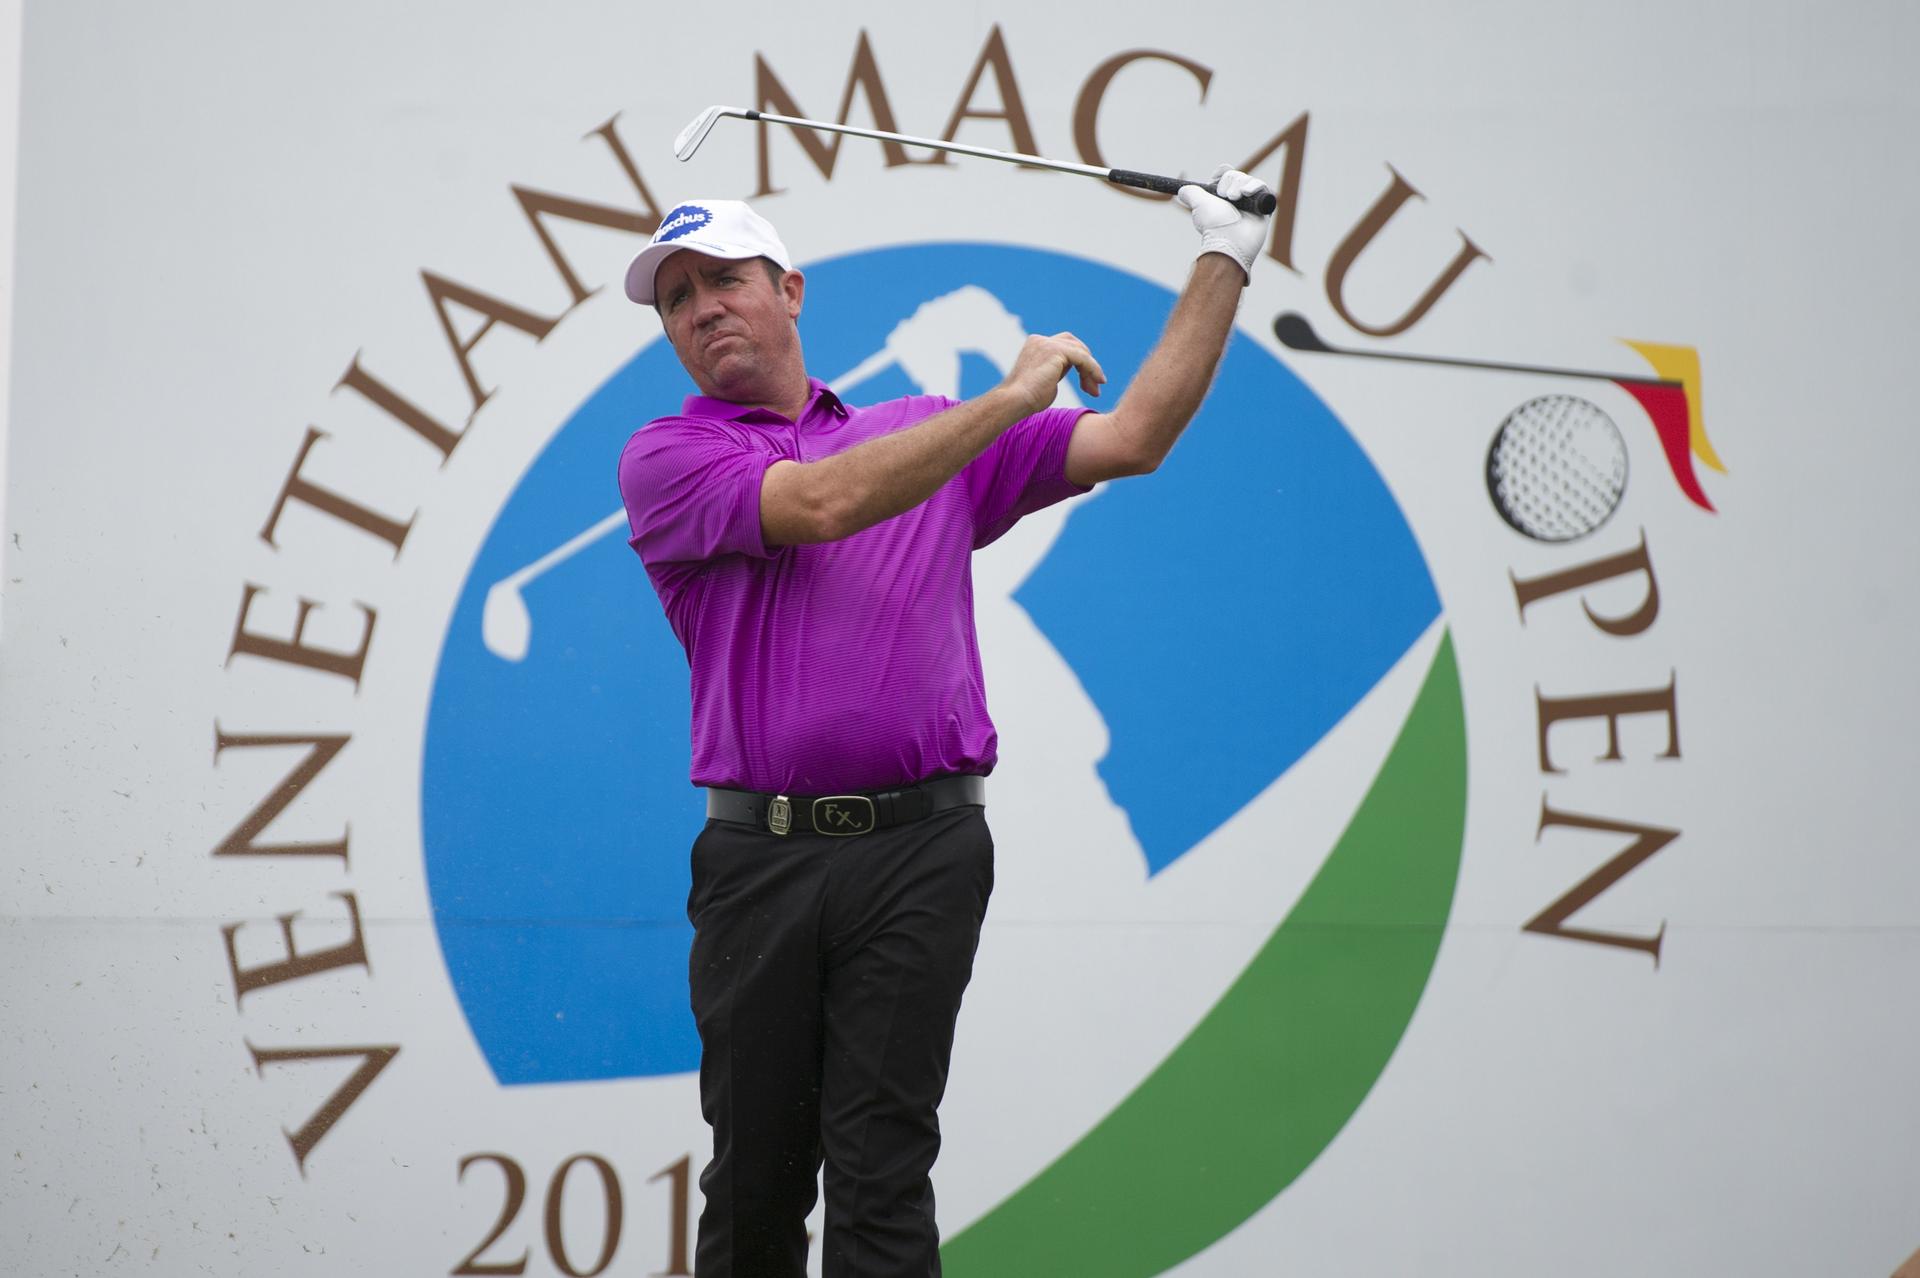 Scott Hend is hoping to win the title this year to avenge losing the title to Anirban Lahiri. Photo: AFP